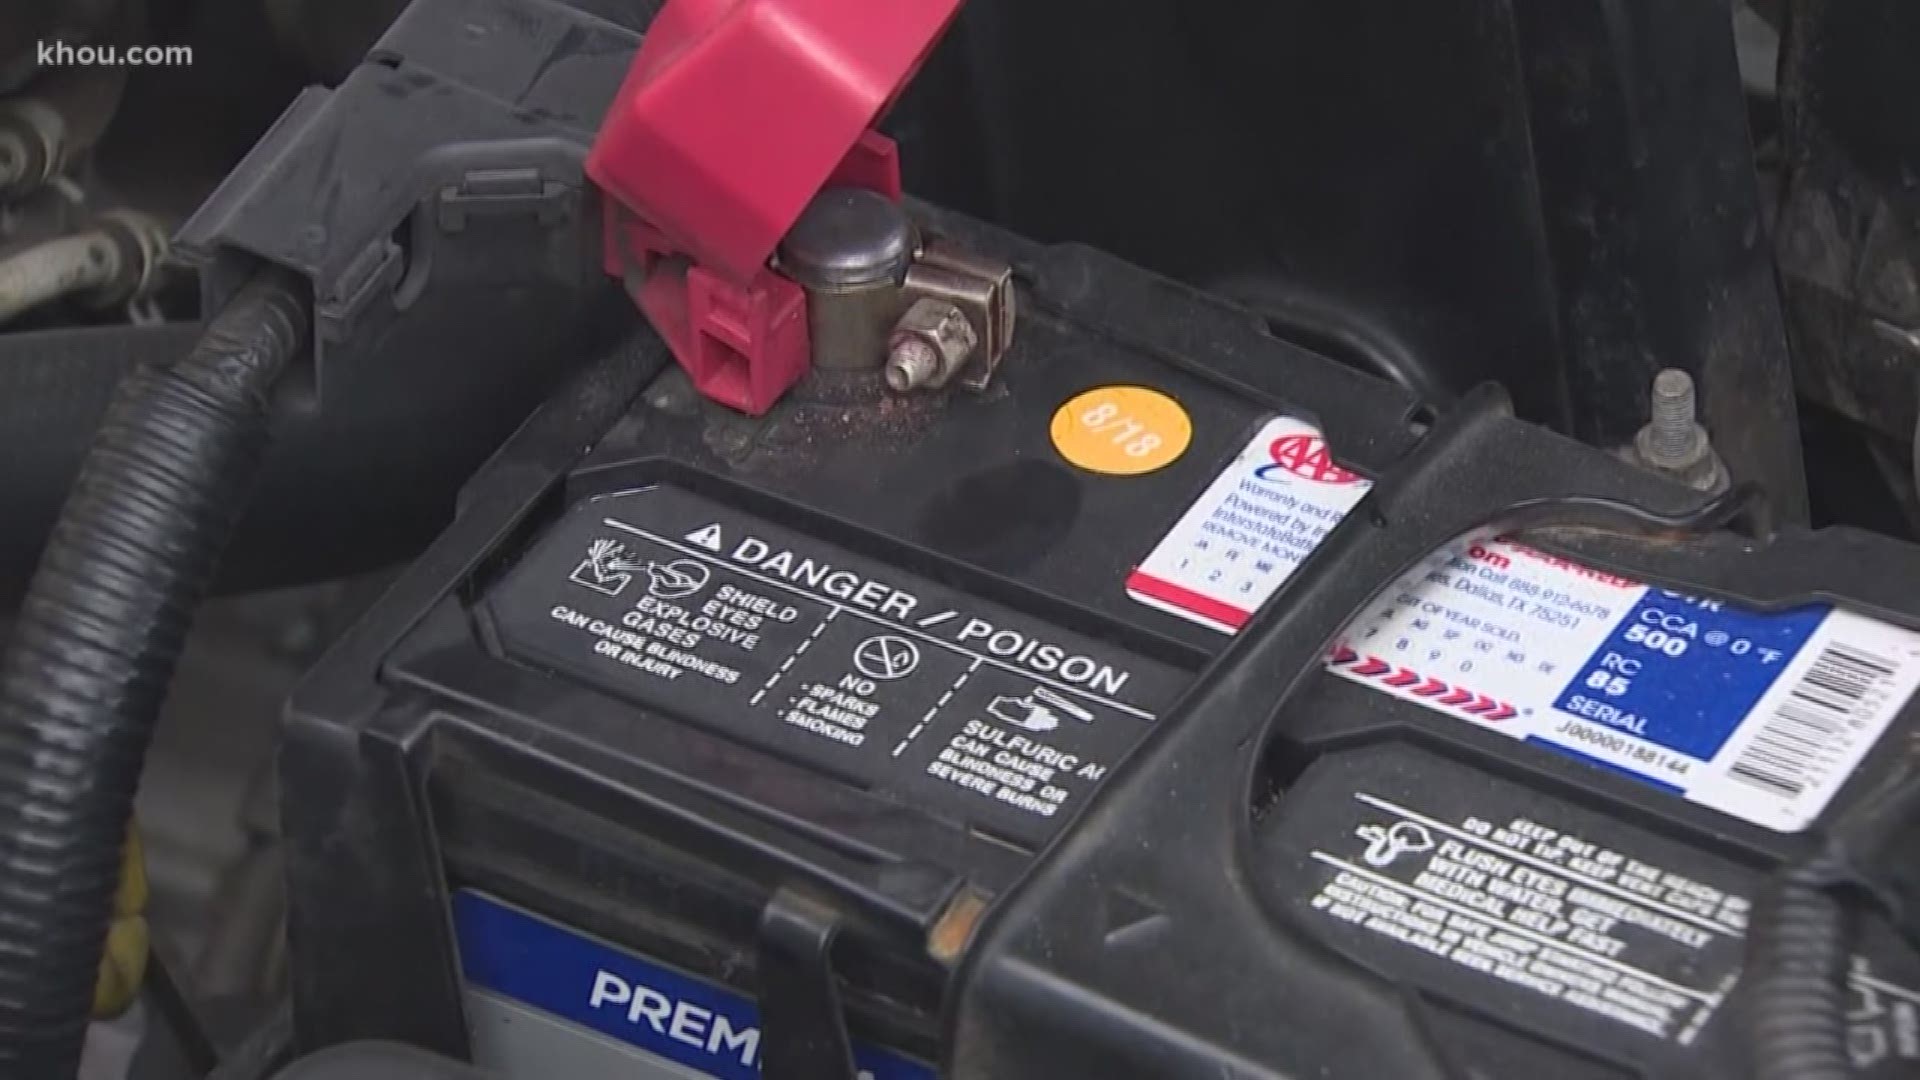 Ron Trevino has some tips on how to keep your motor in good shape as cold weather hits Houston.